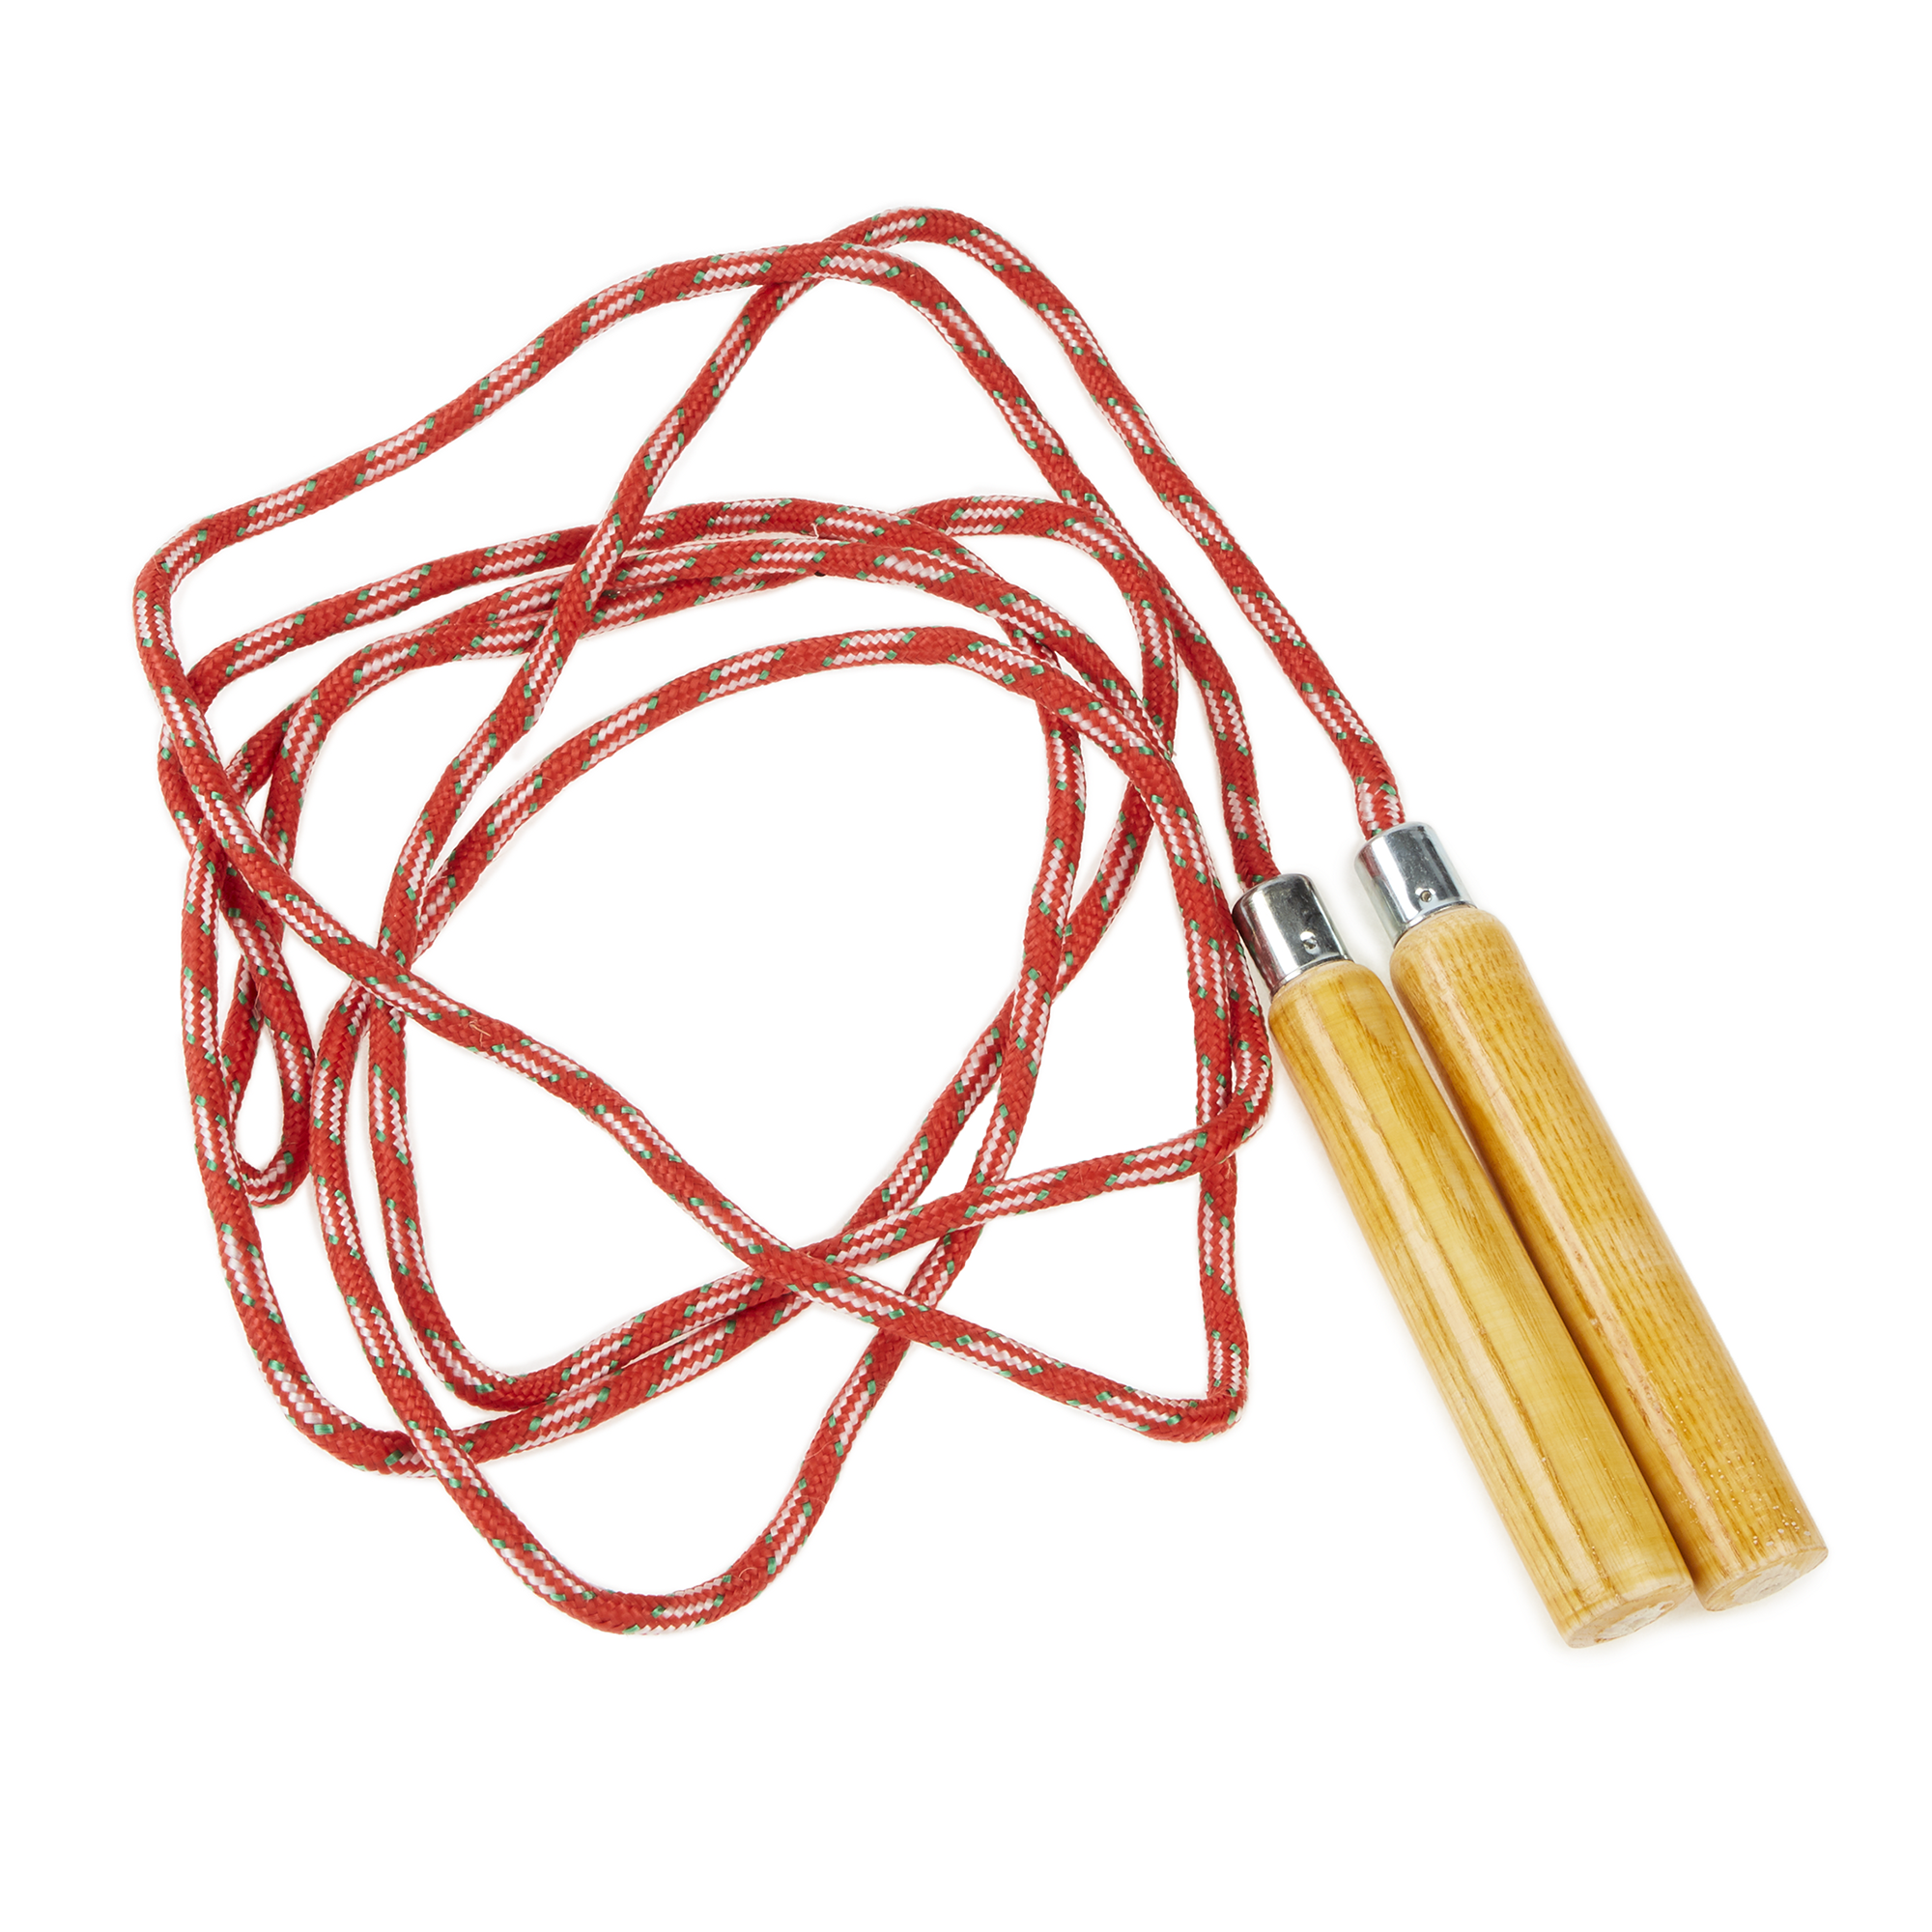 PPEP07462 - Wooden Handle Skipping Rope - Red - 10ft